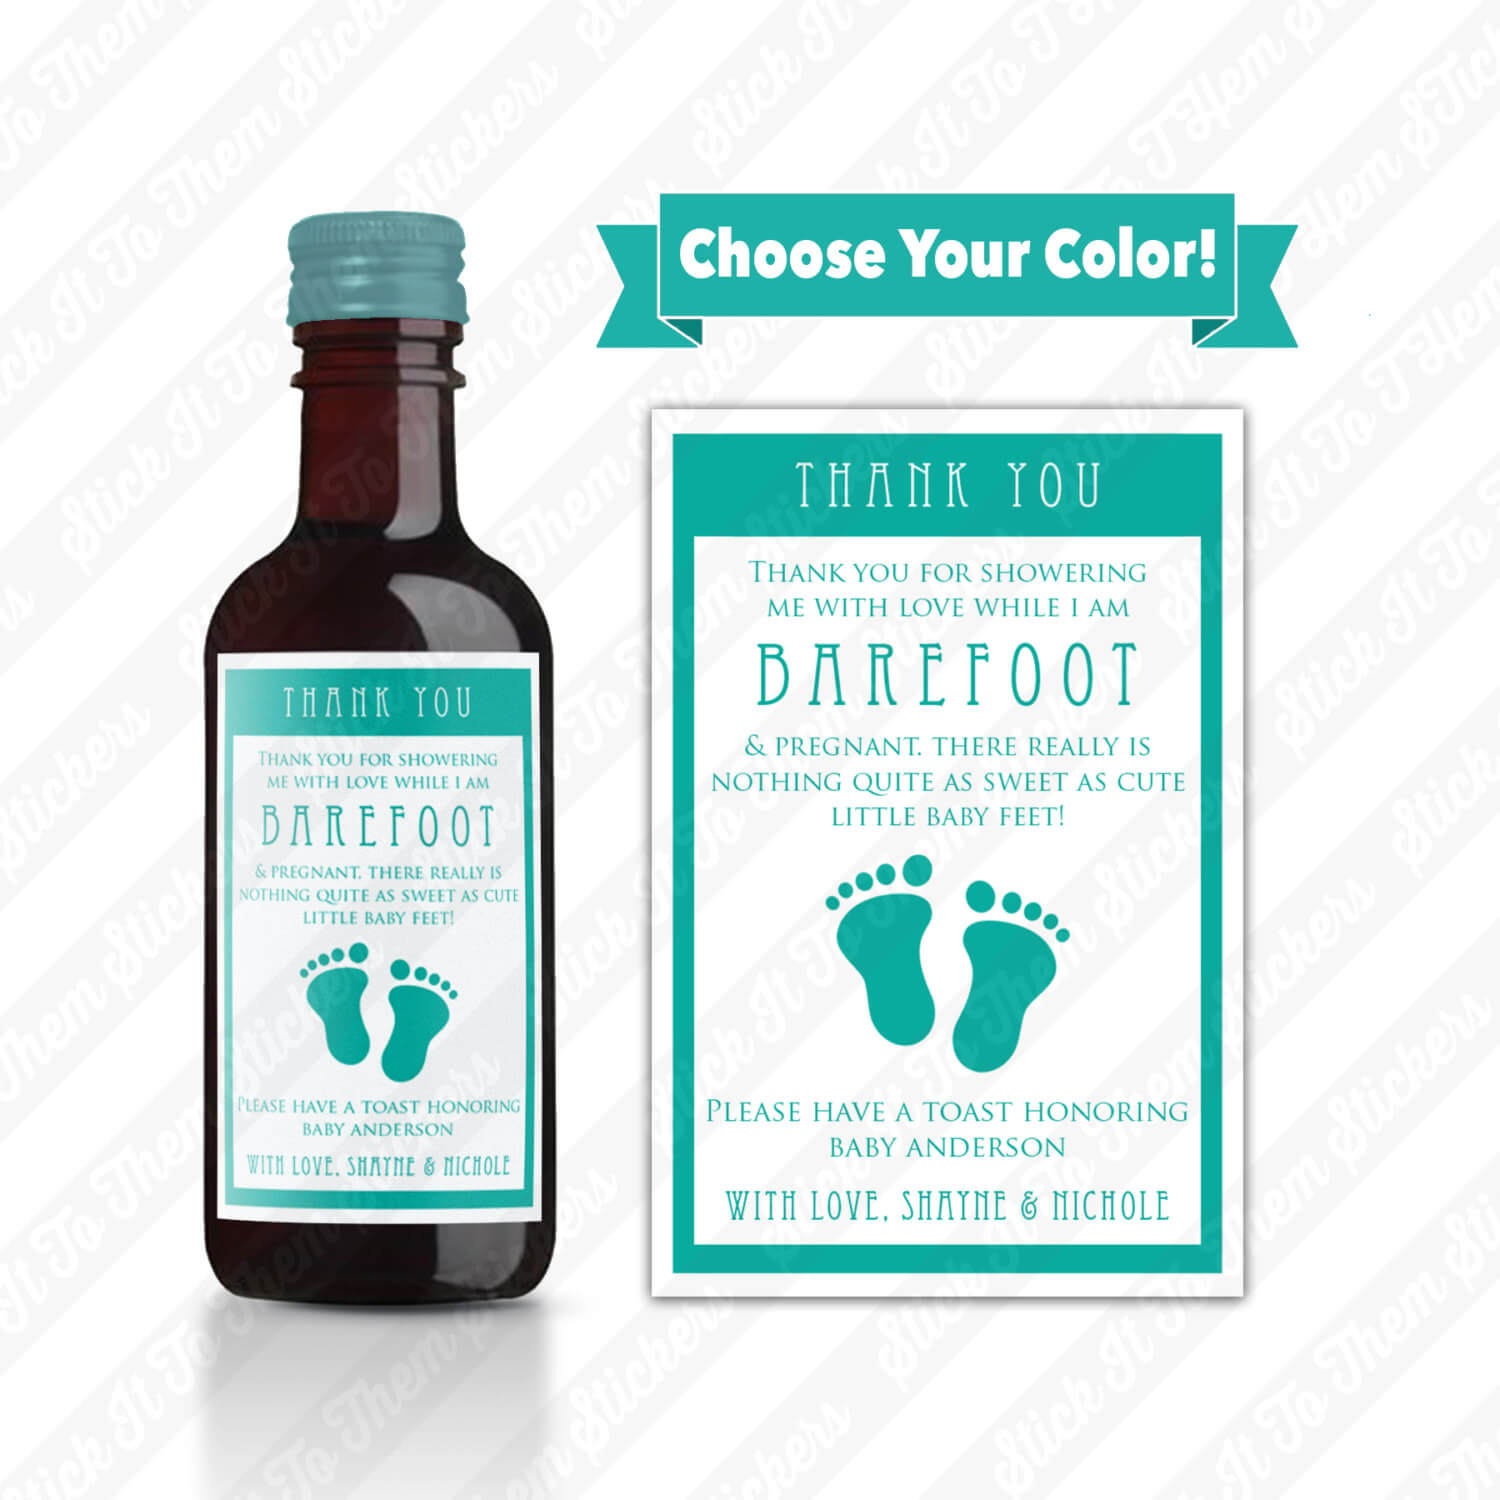 Custom Barefoot & Pregnant Thank You Mini Wine Bottle Label - Personalized Sticker Appreciation for Cute Baby Shower Favor Gift Present Idea